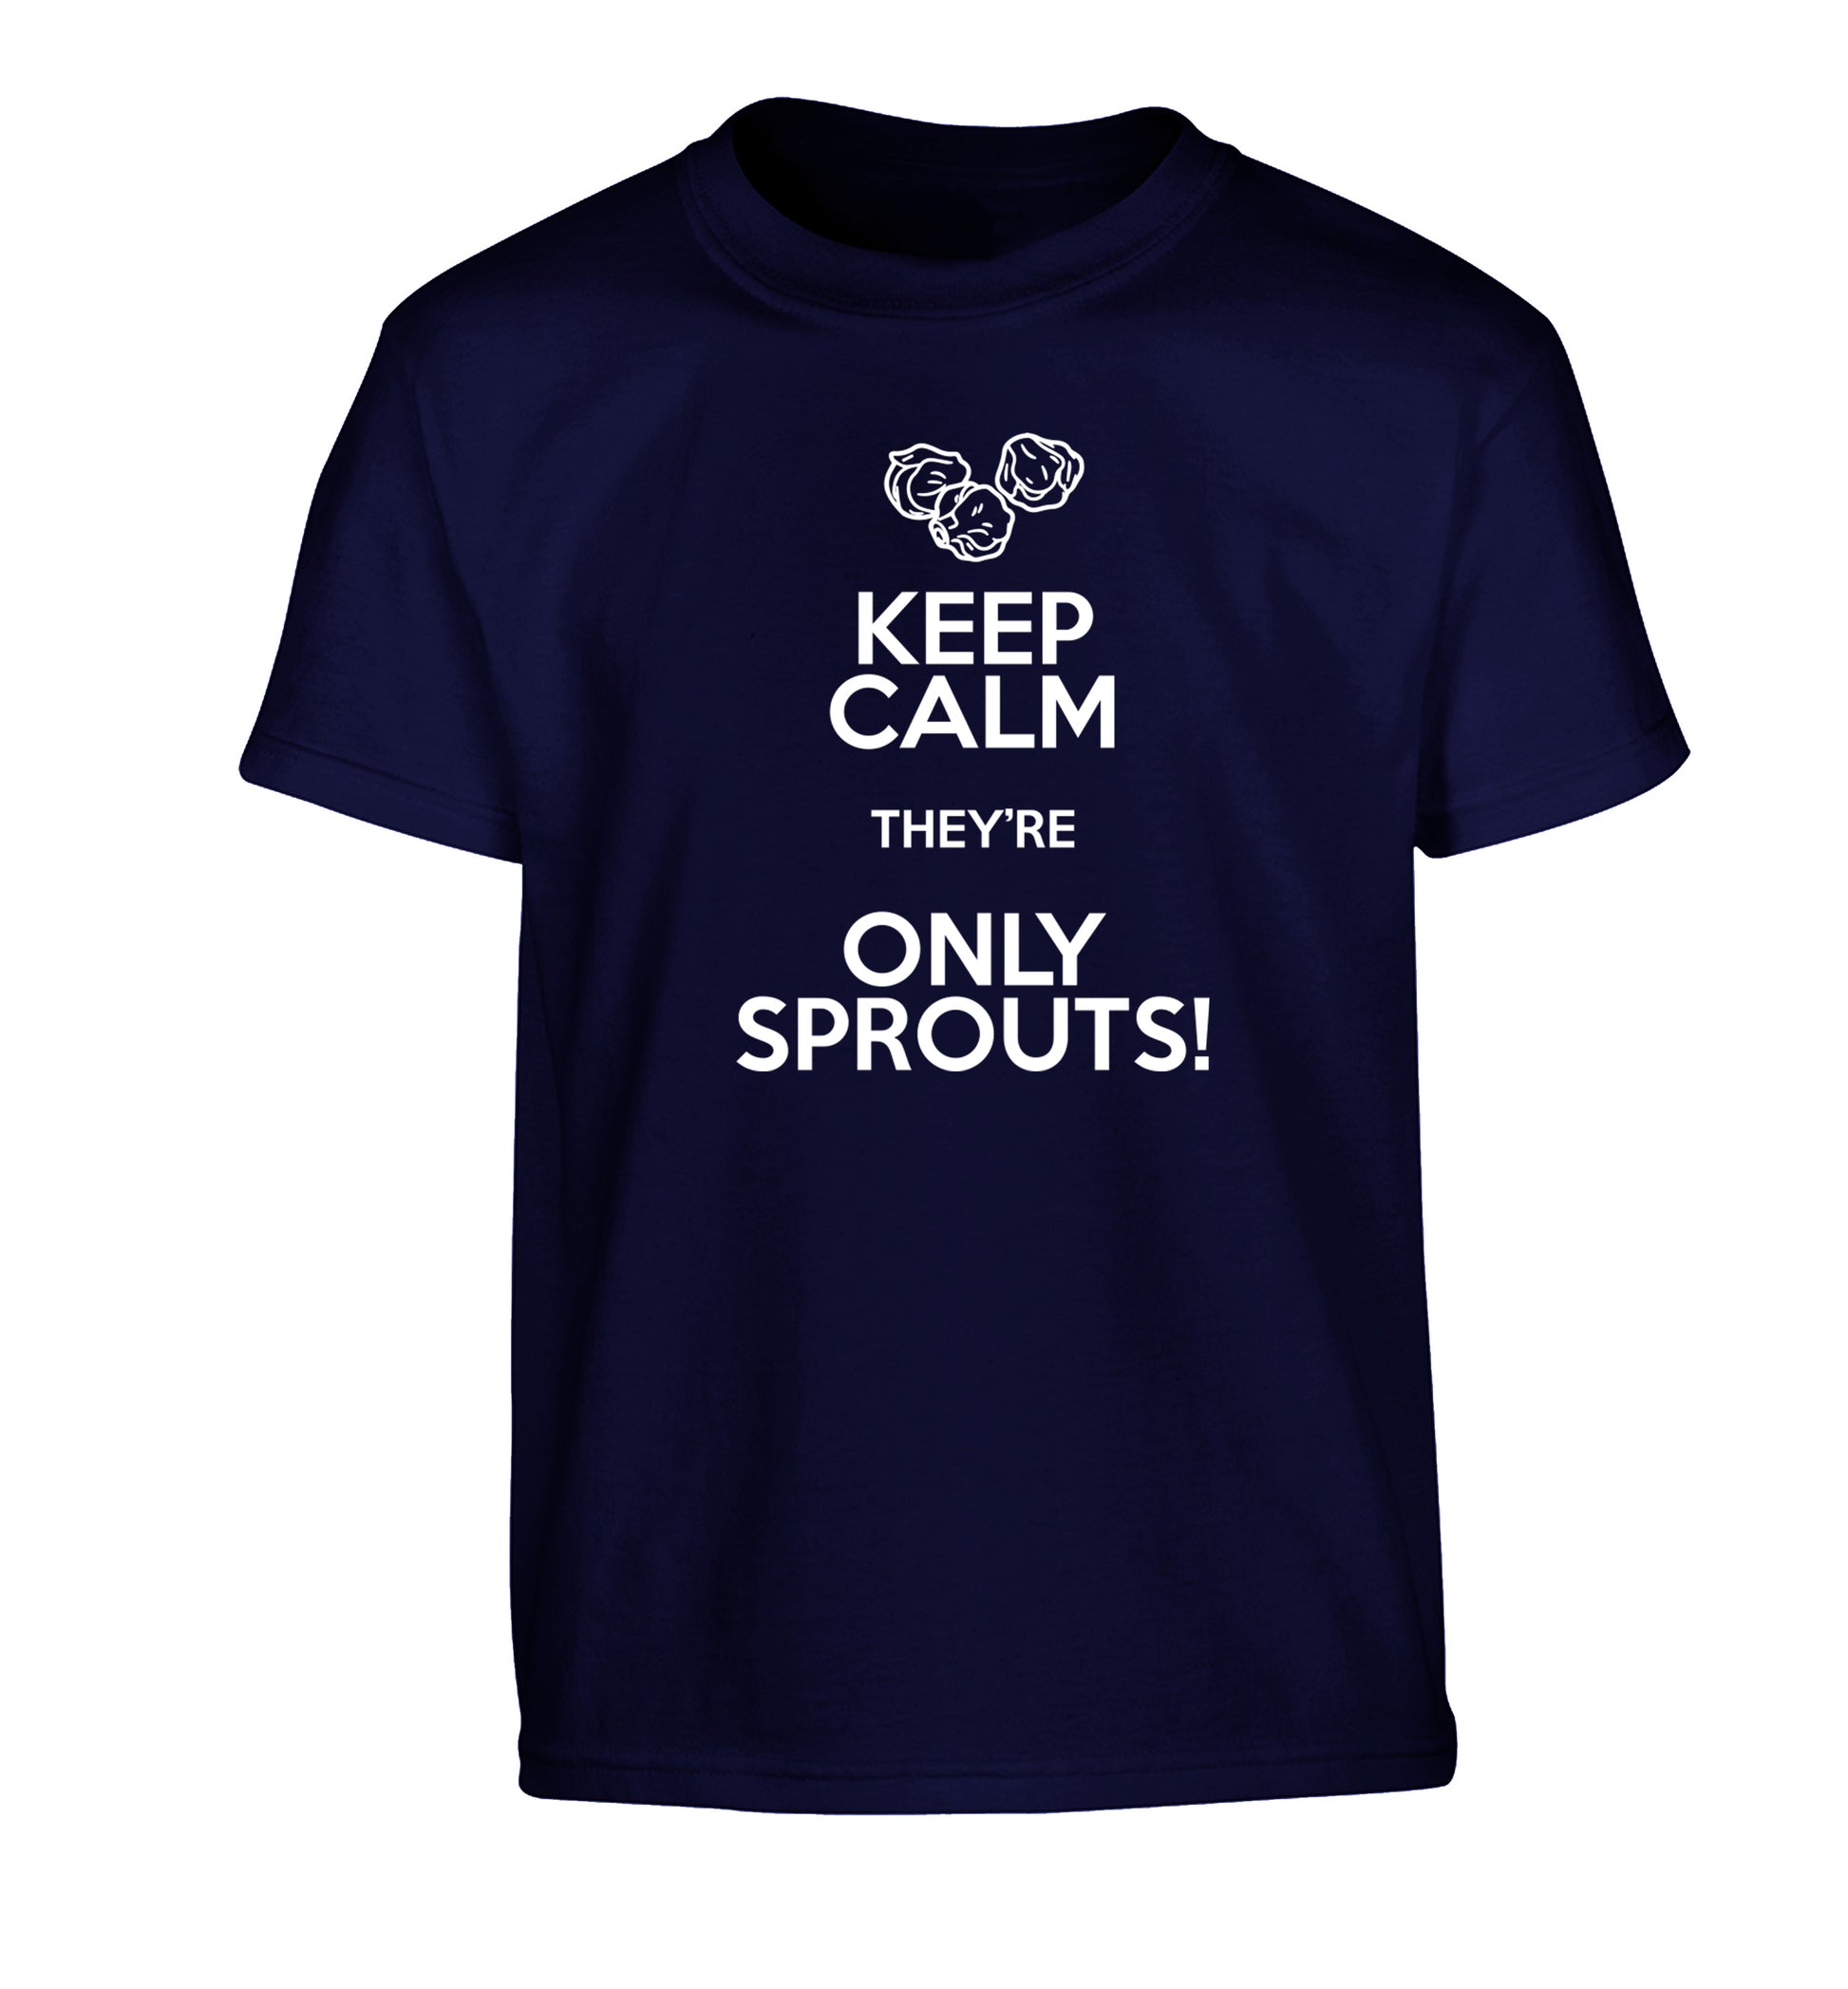 Keep calm they're only sprouts Children's navy Tshirt 12-13 Years